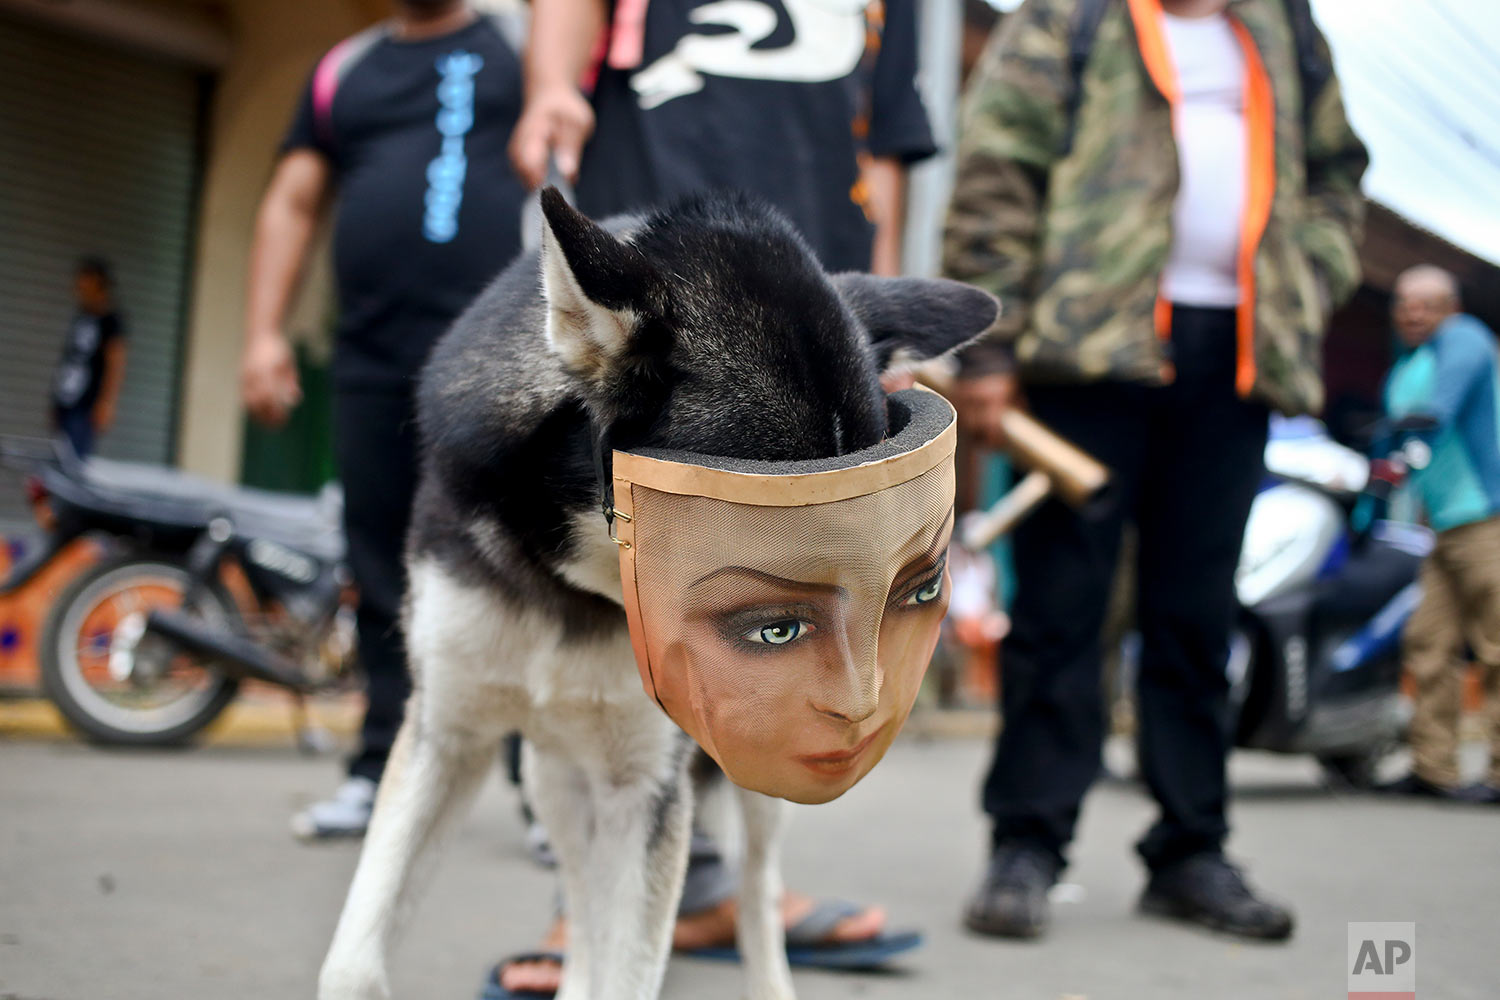  In this May 28, 2018 photo, a protester's dog wears a mask as he accompanies his owner at a road block set up by anti-government demonstrators in Masaya, Nicaragua. (AP Photo/Esteban Felix) 